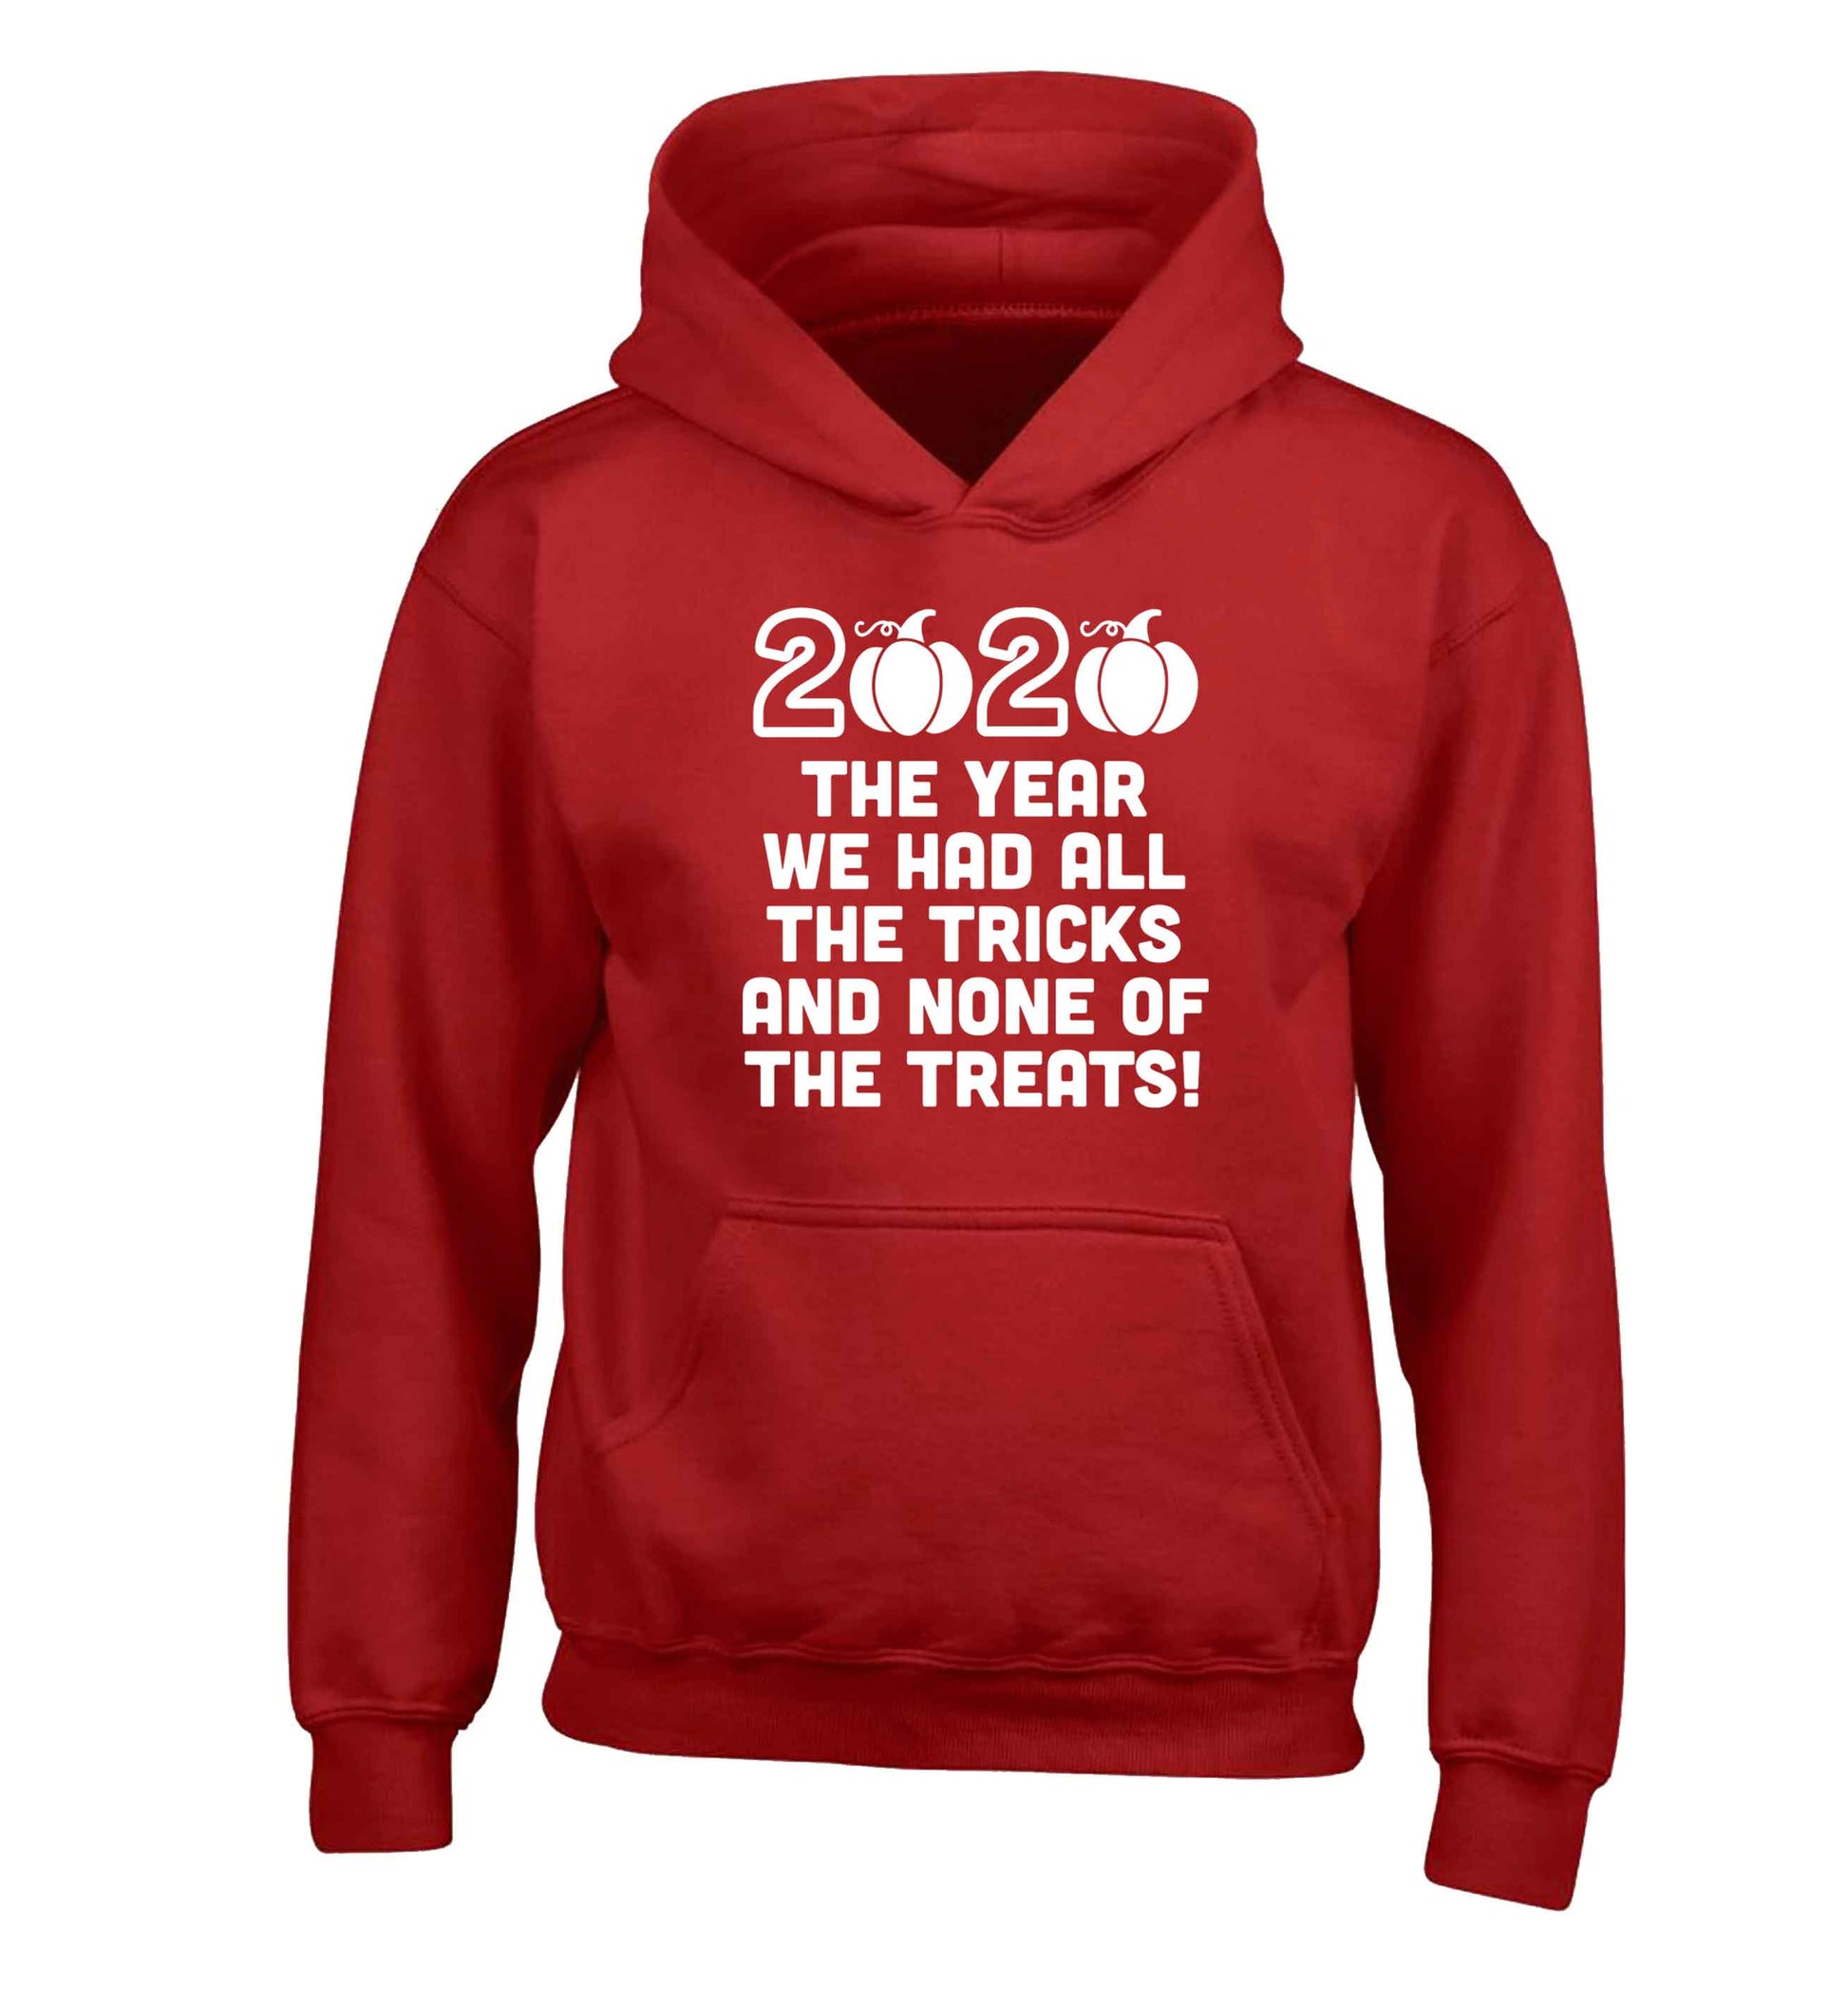 2020 The year we had all of the tricks and none of the treats children's red hoodie 12-13 Years